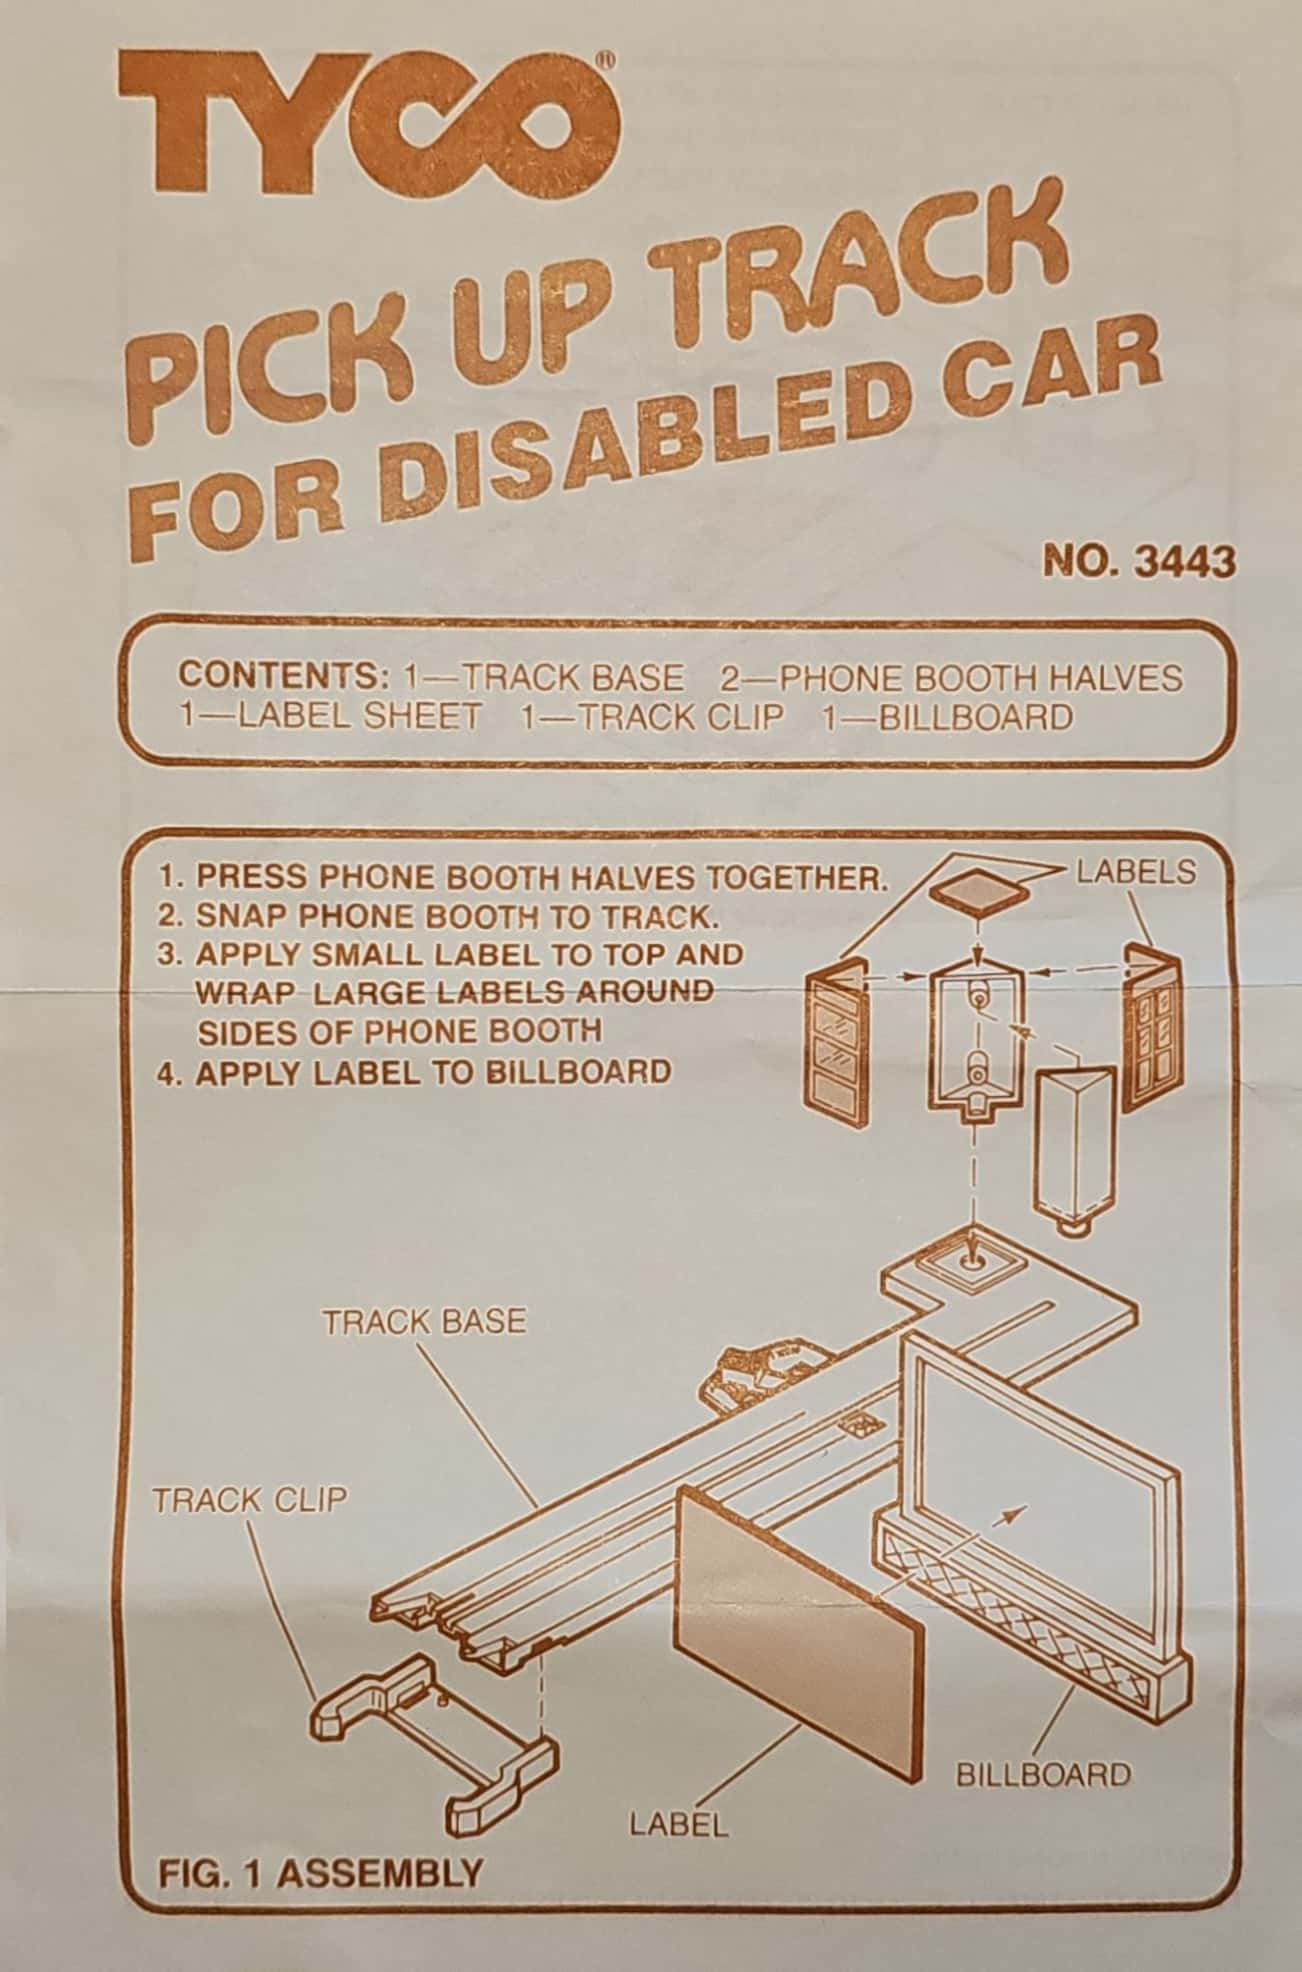 Phone Booth Pickup Track For Disabled Car Instructions